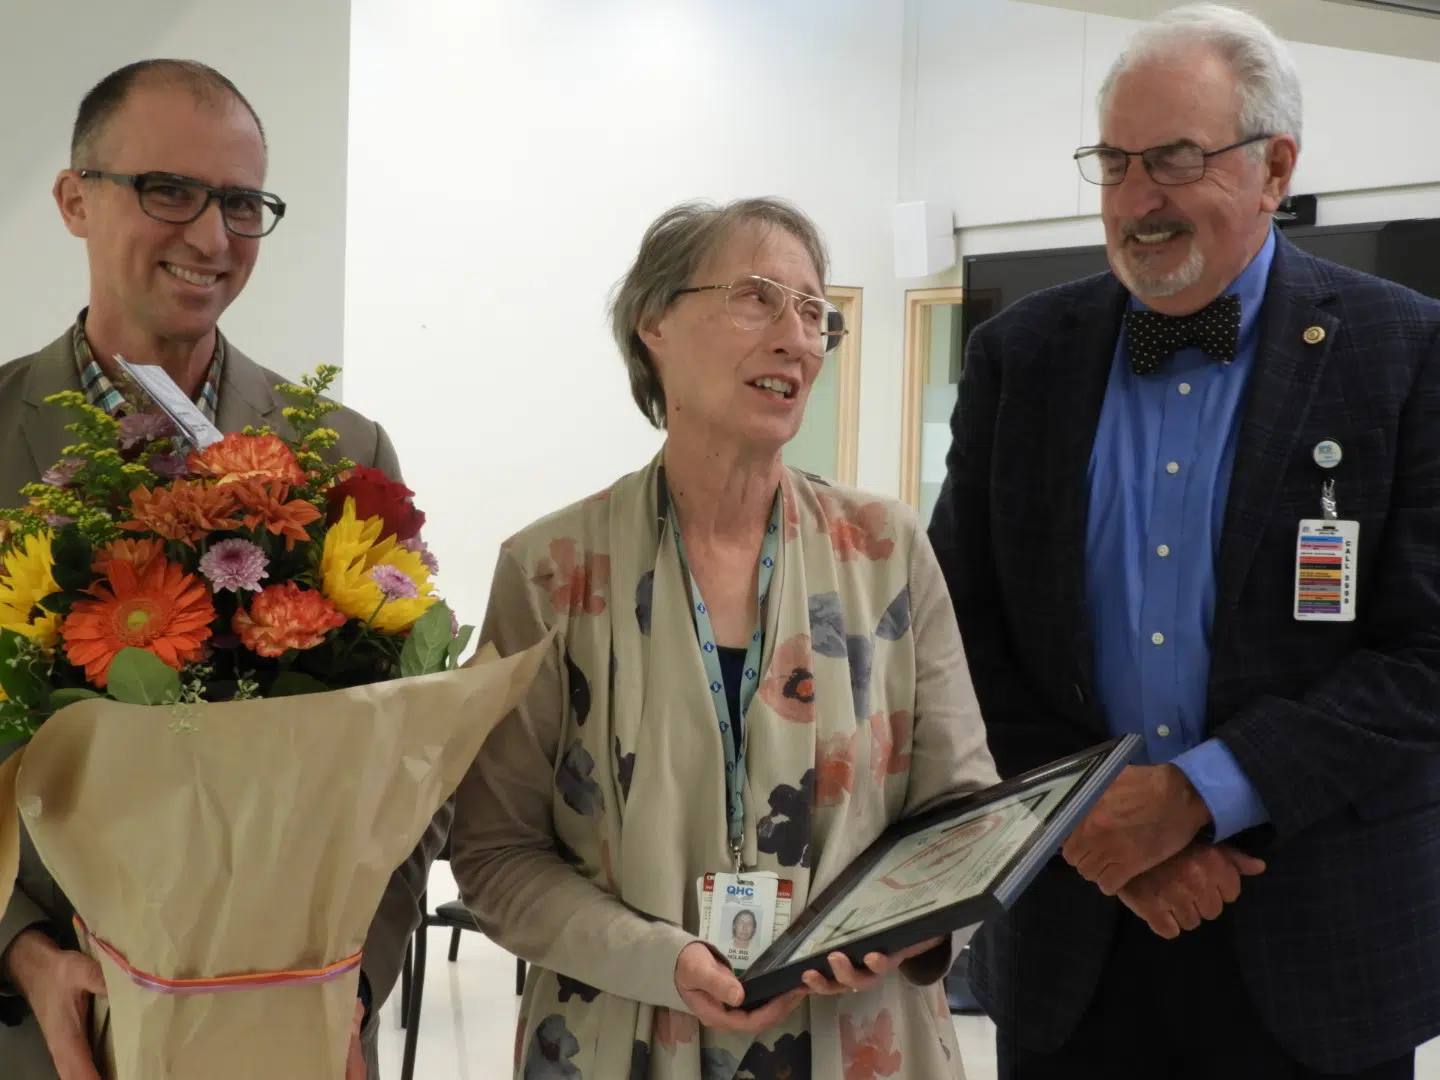 An exemplary physician retires from QHC